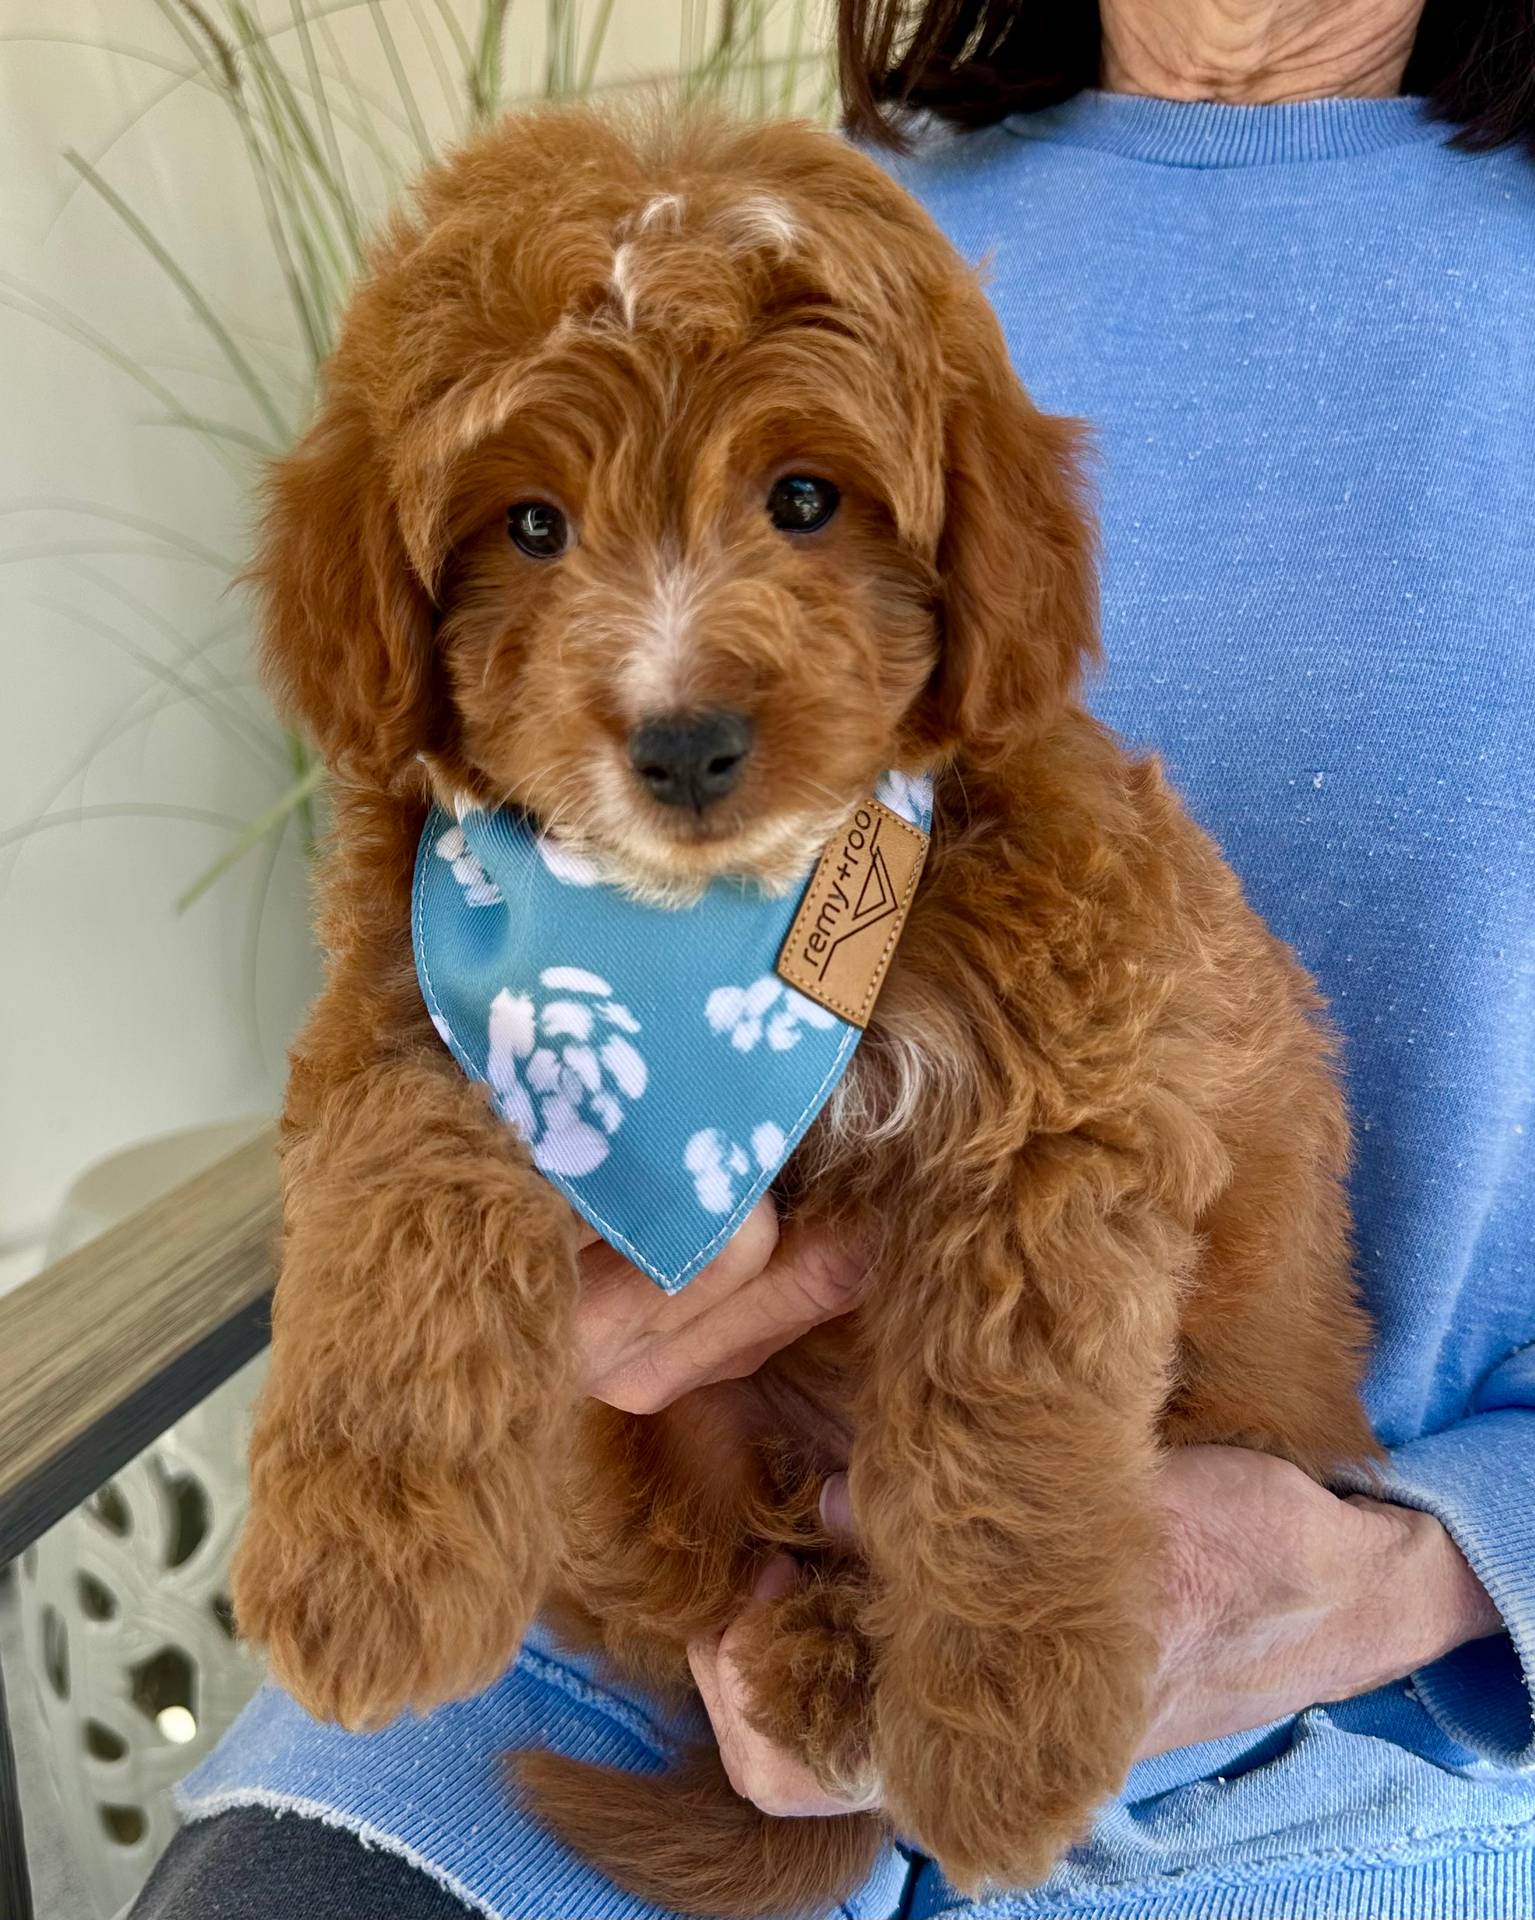 Teddy - Red_Apricot - Male - Toy Goldendoodle - Petite Posh Puppies_New Jan _